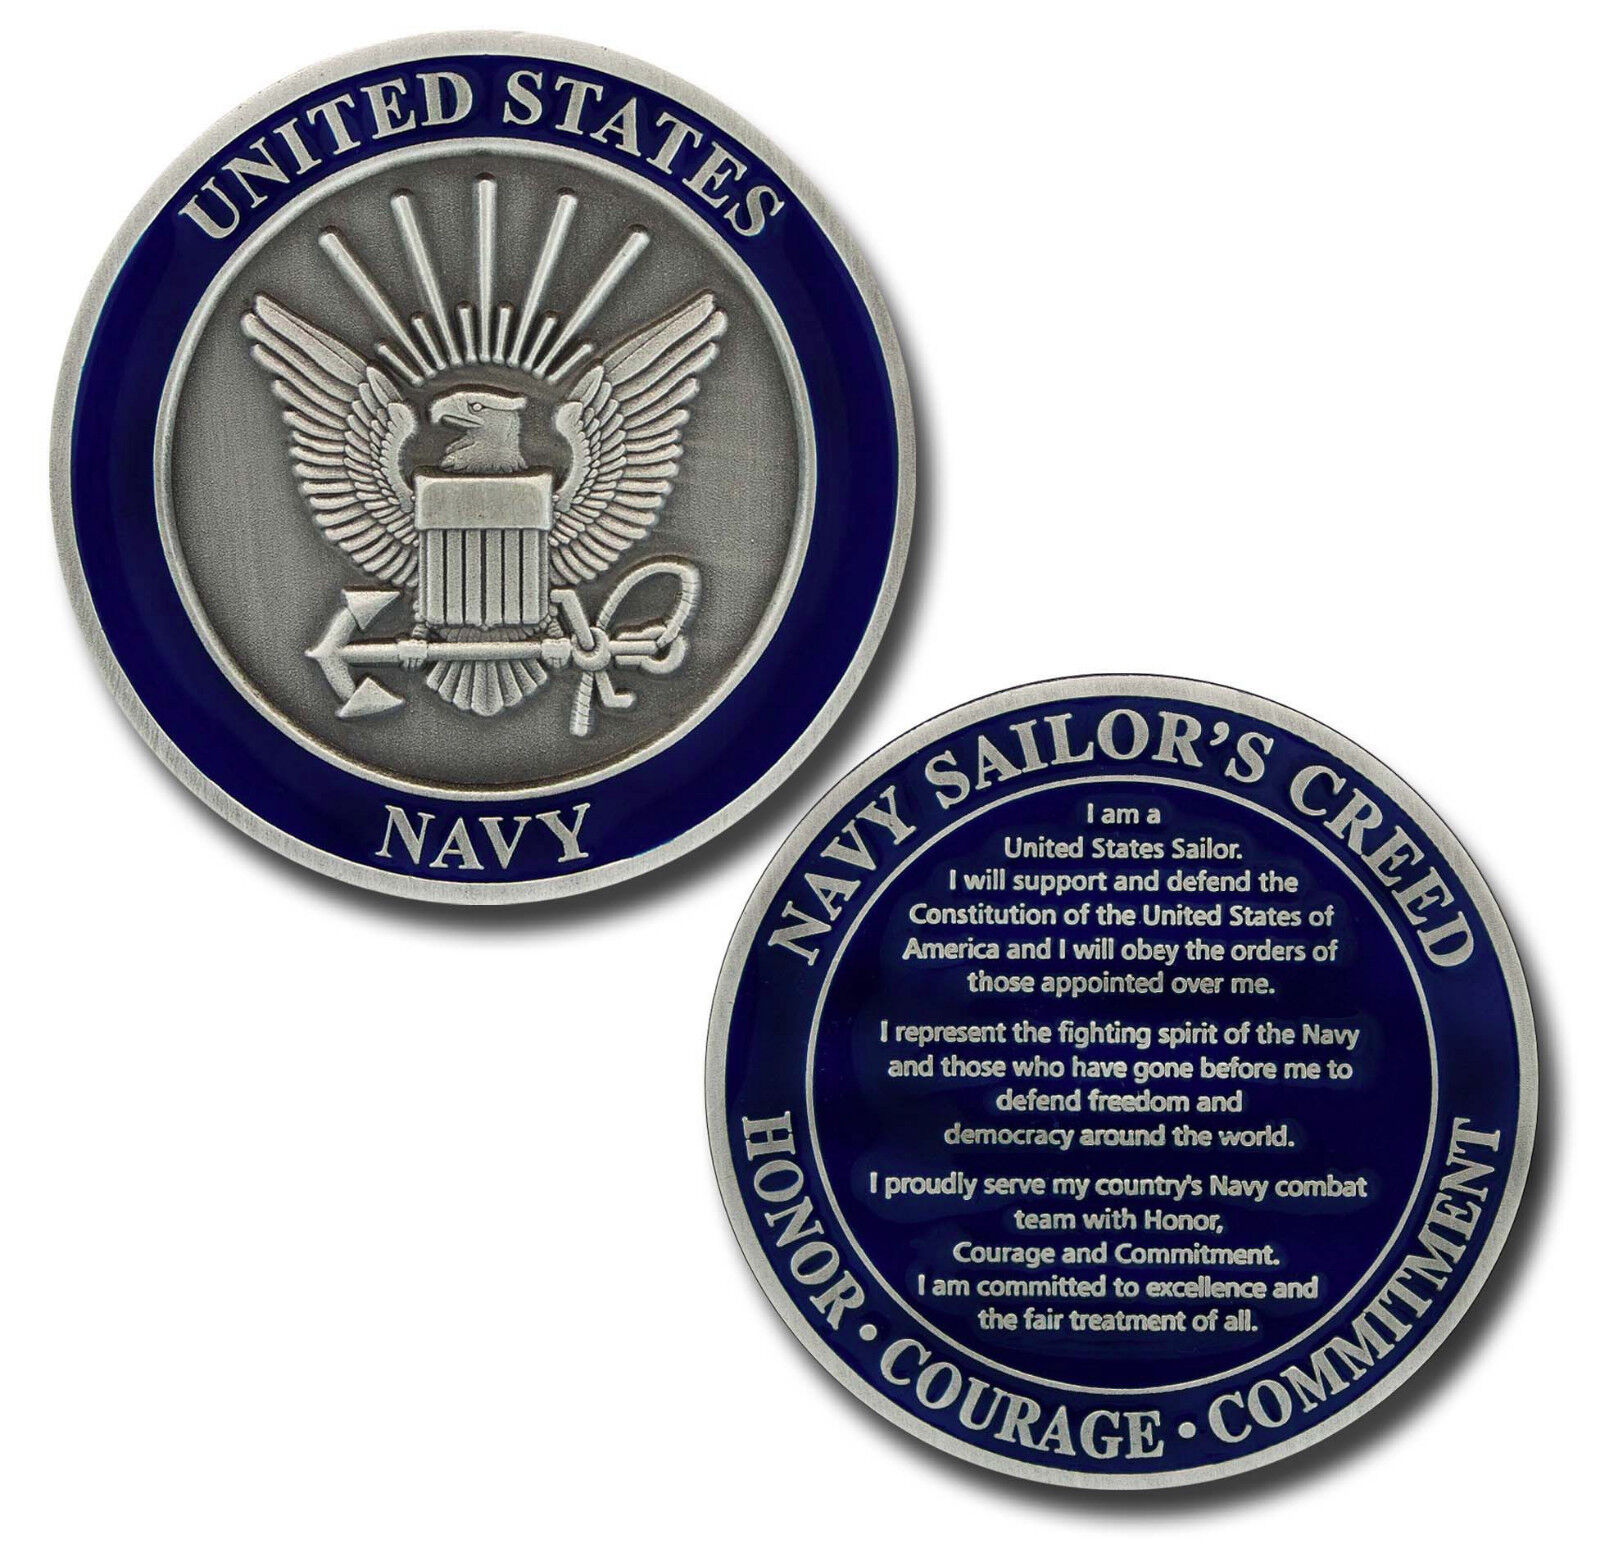 NEW U.S. Navy Sailor's Creed Challenge Coin.